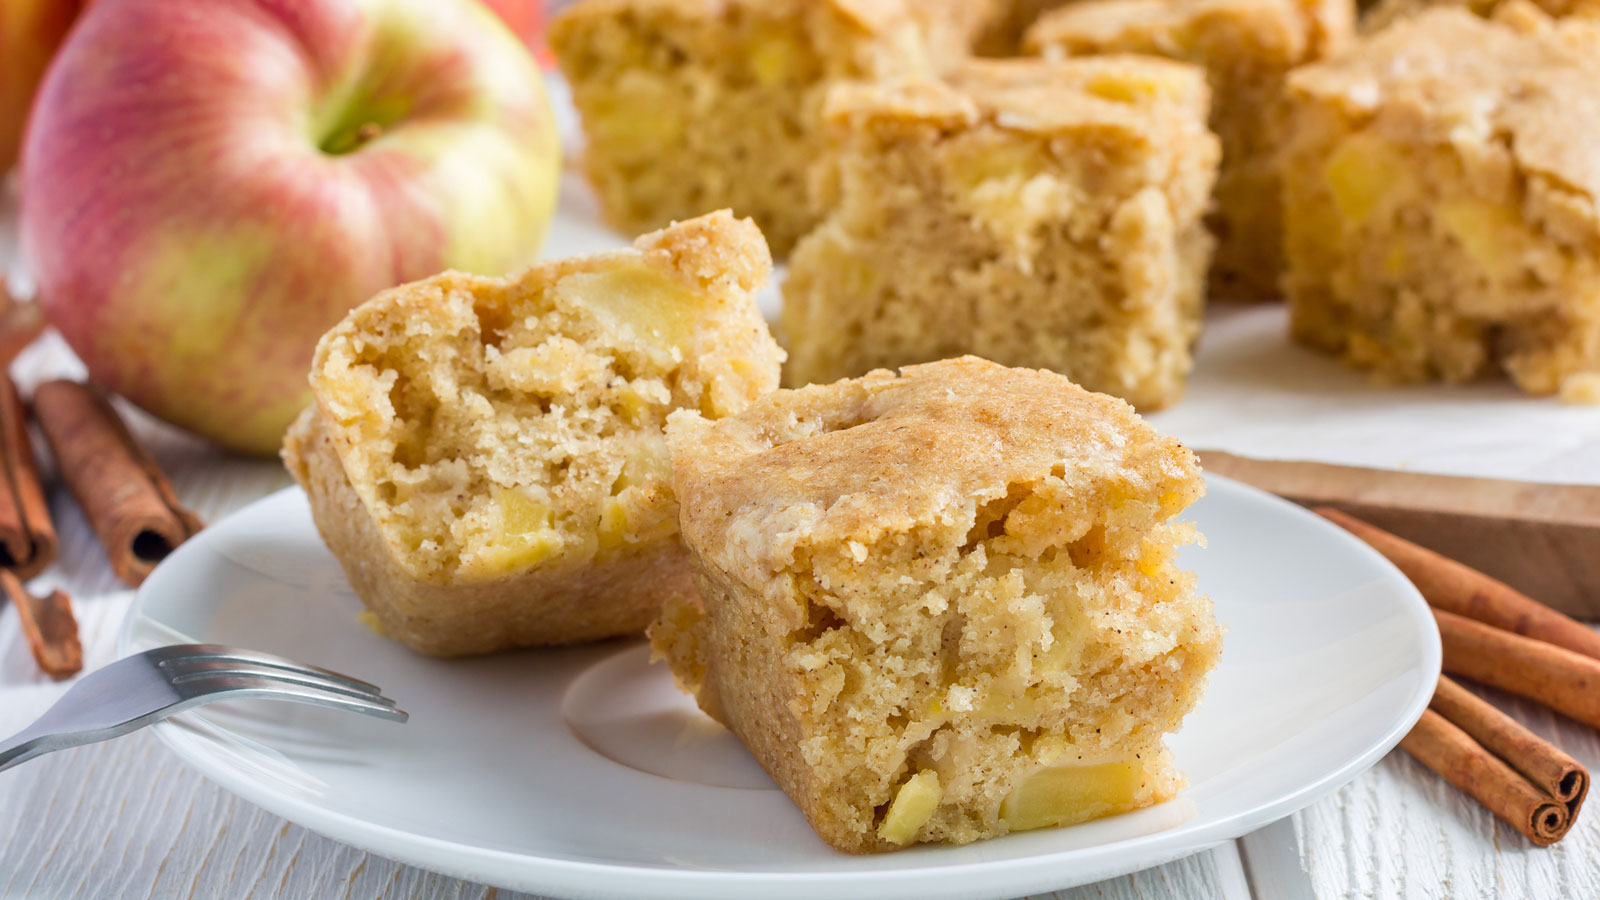 two slices of apple cake on a plate